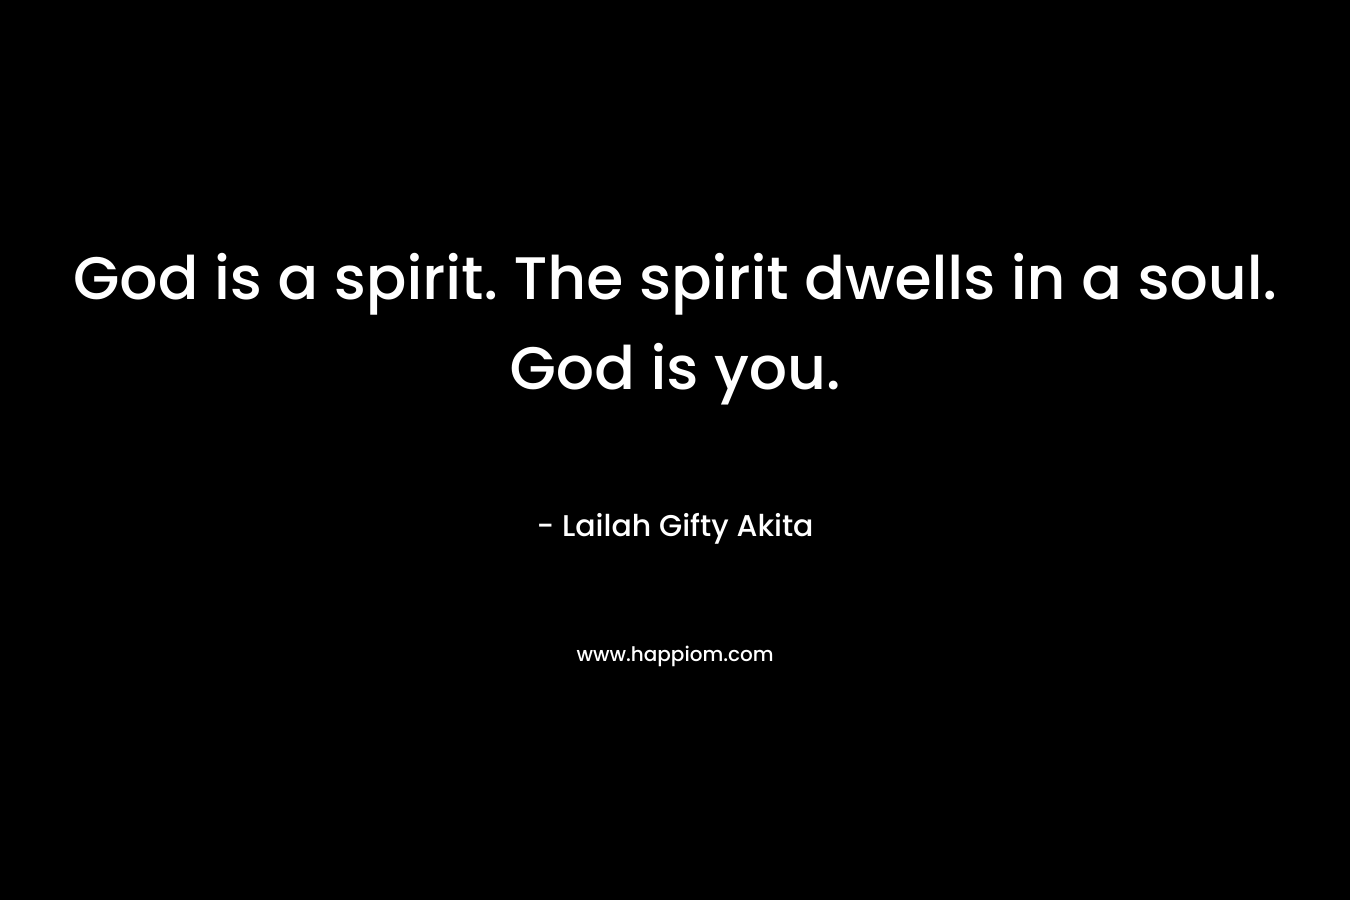 God is a spirit. The spirit dwells in a soul. God is you.